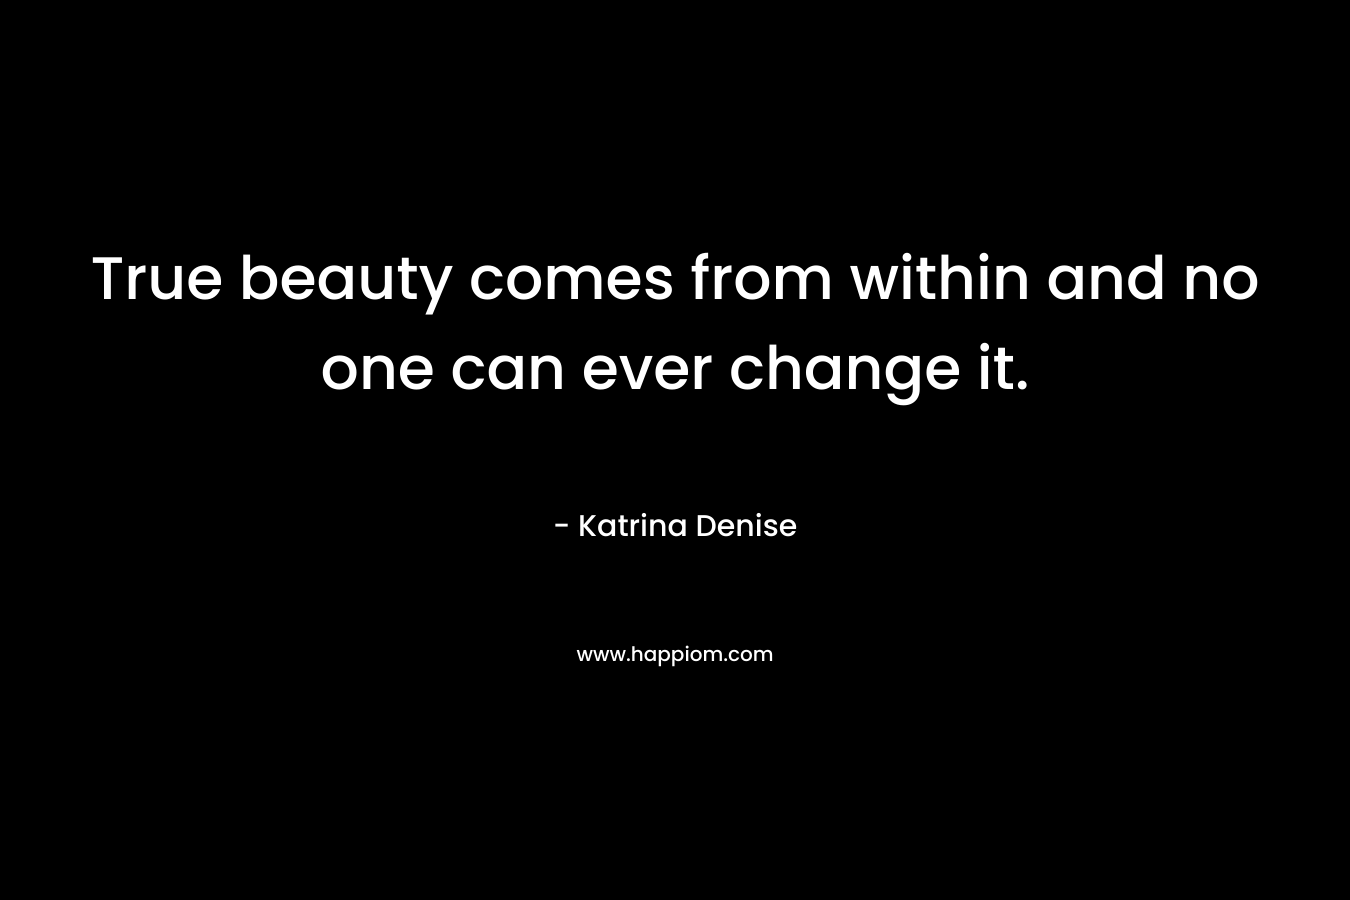 True beauty comes from within and no one can ever change it. – Katrina Denise